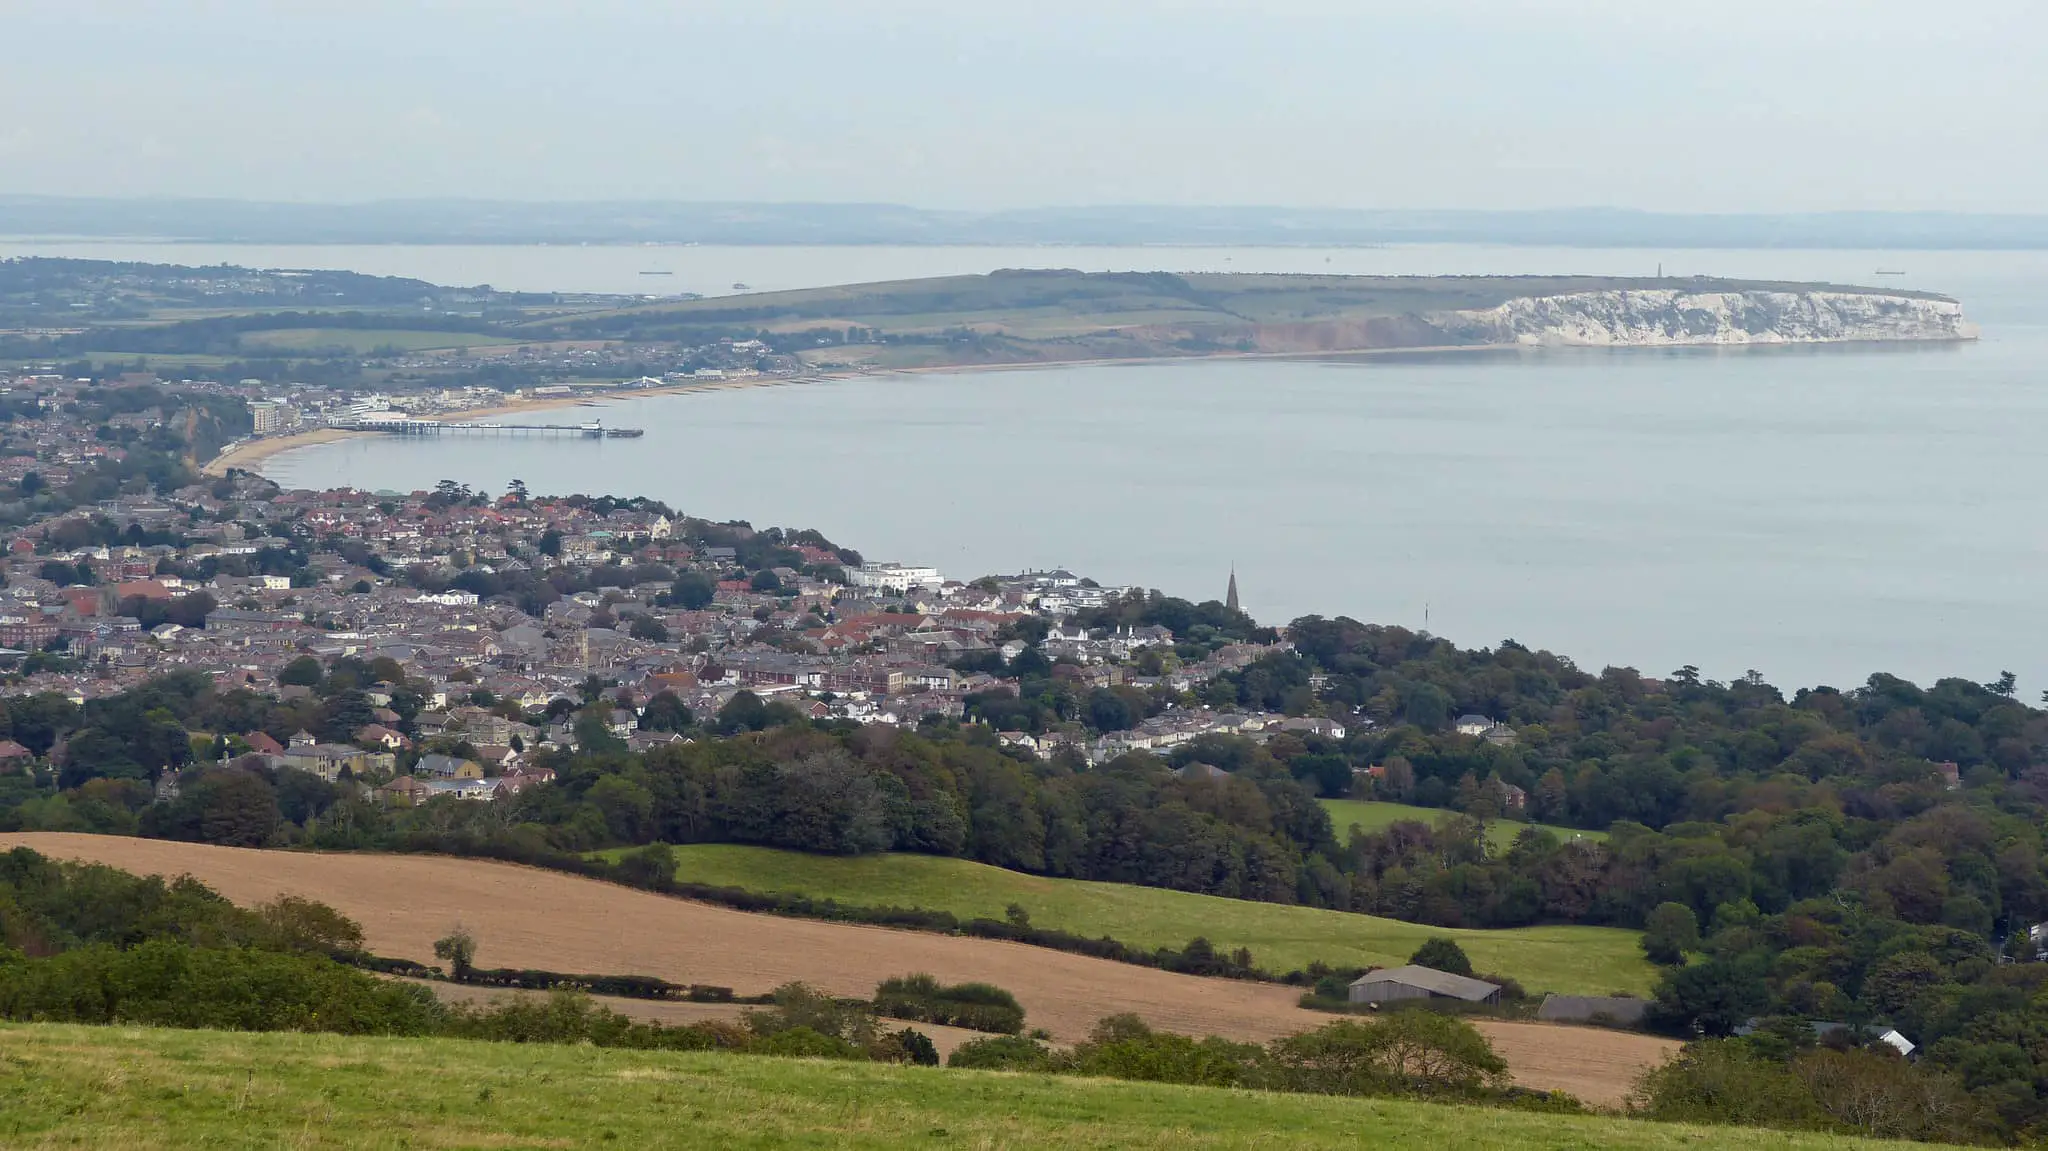 View of Sandown from a distance